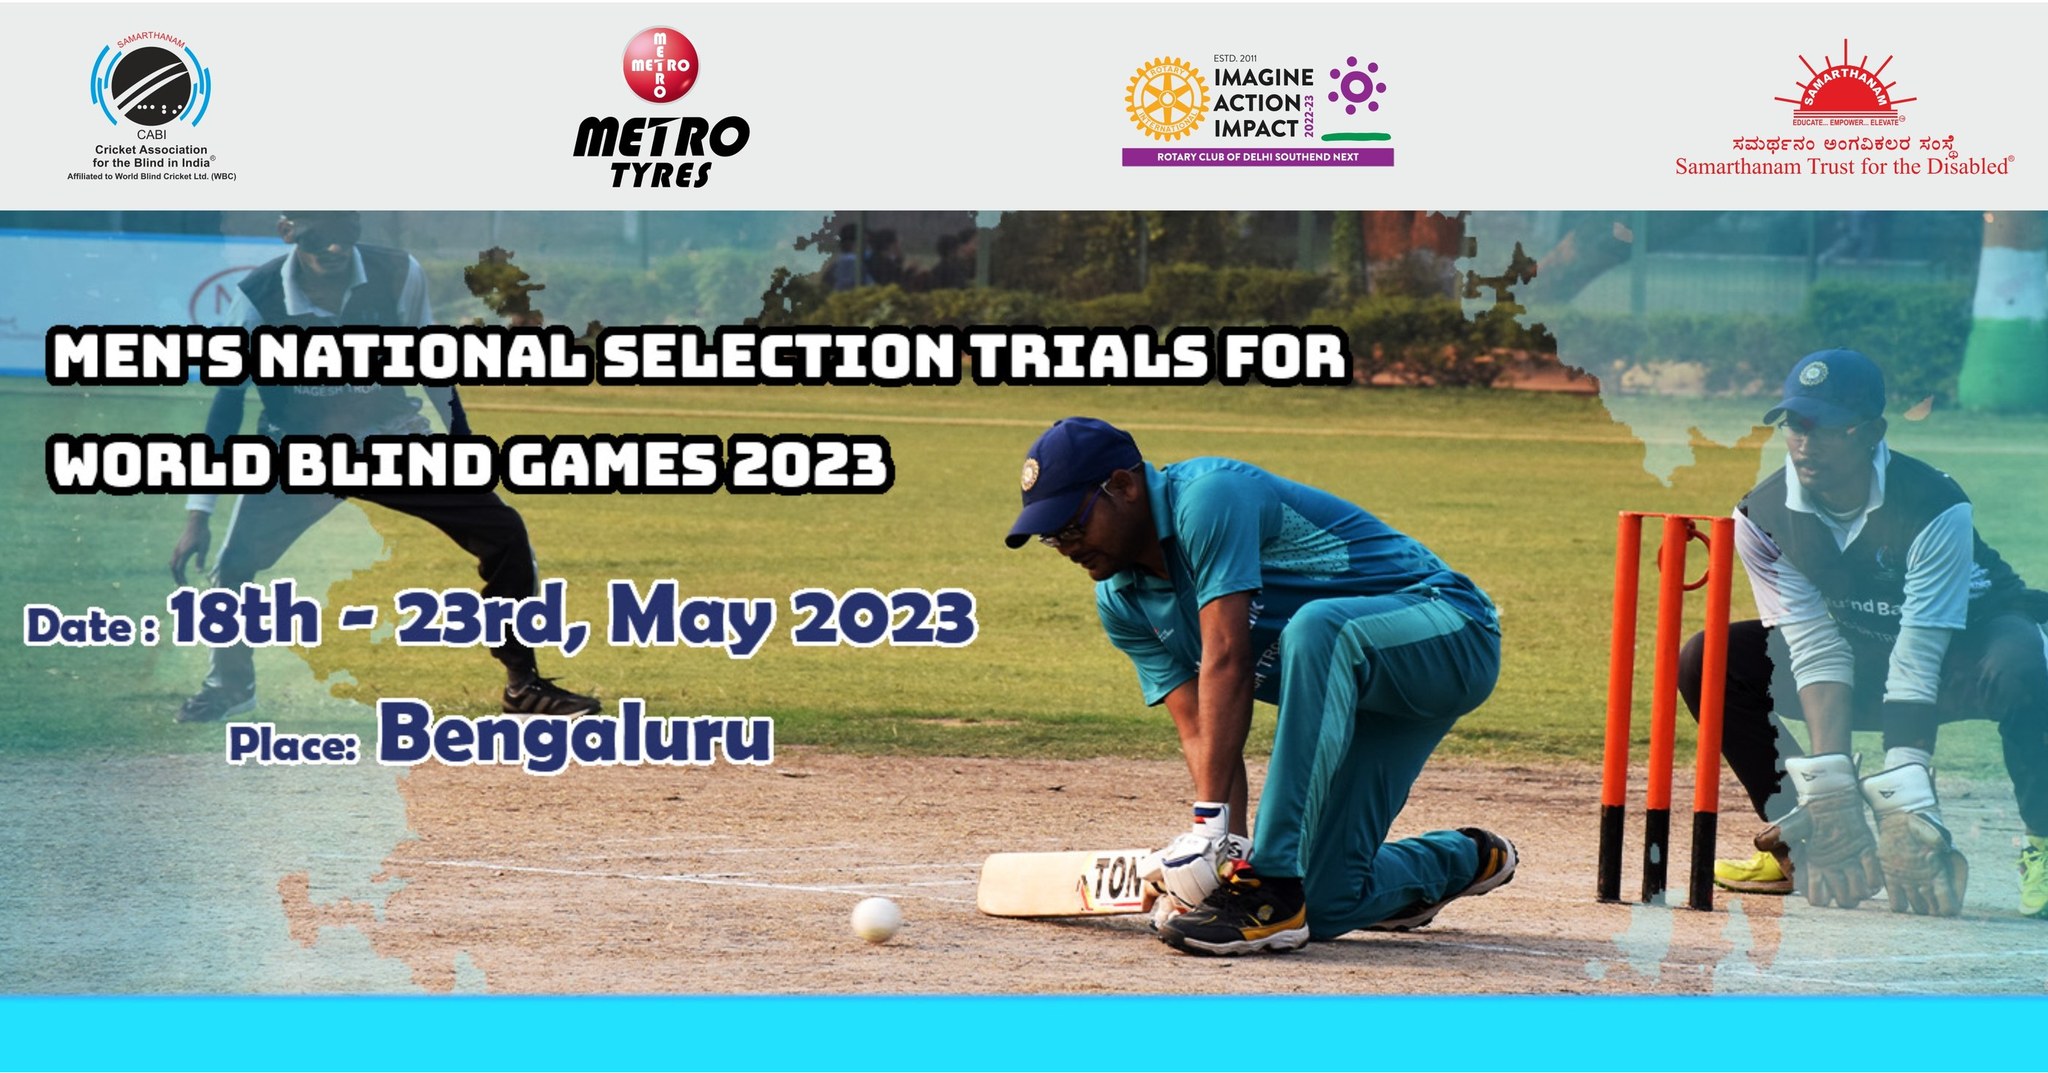 Men's National Selection Trials for the World Blind Games 2023